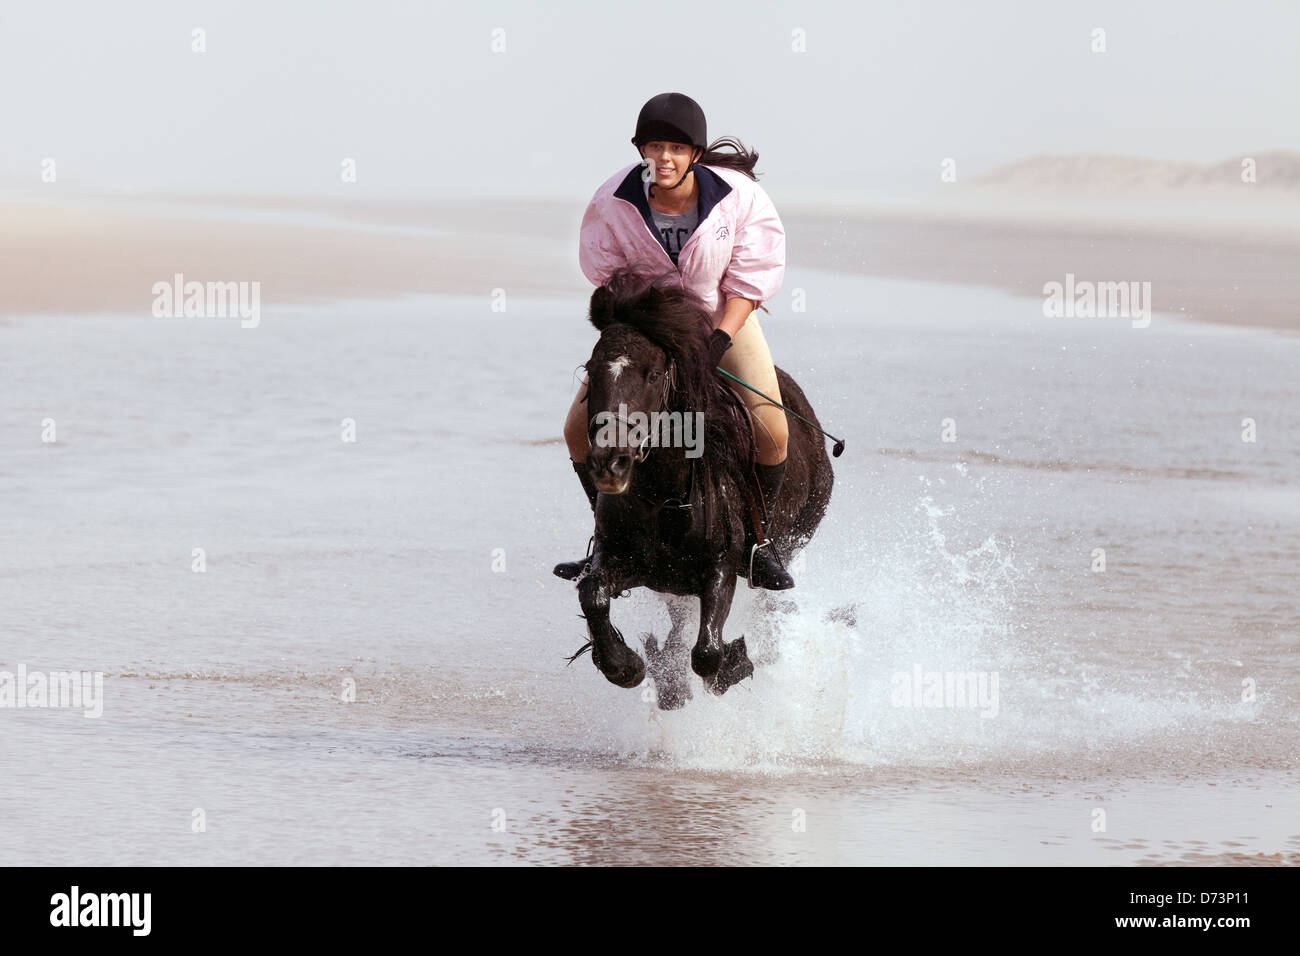 A young woman riding her horse on a sandy beach, Holkham beach Norfolk East Anglia, England UK Stock Photo